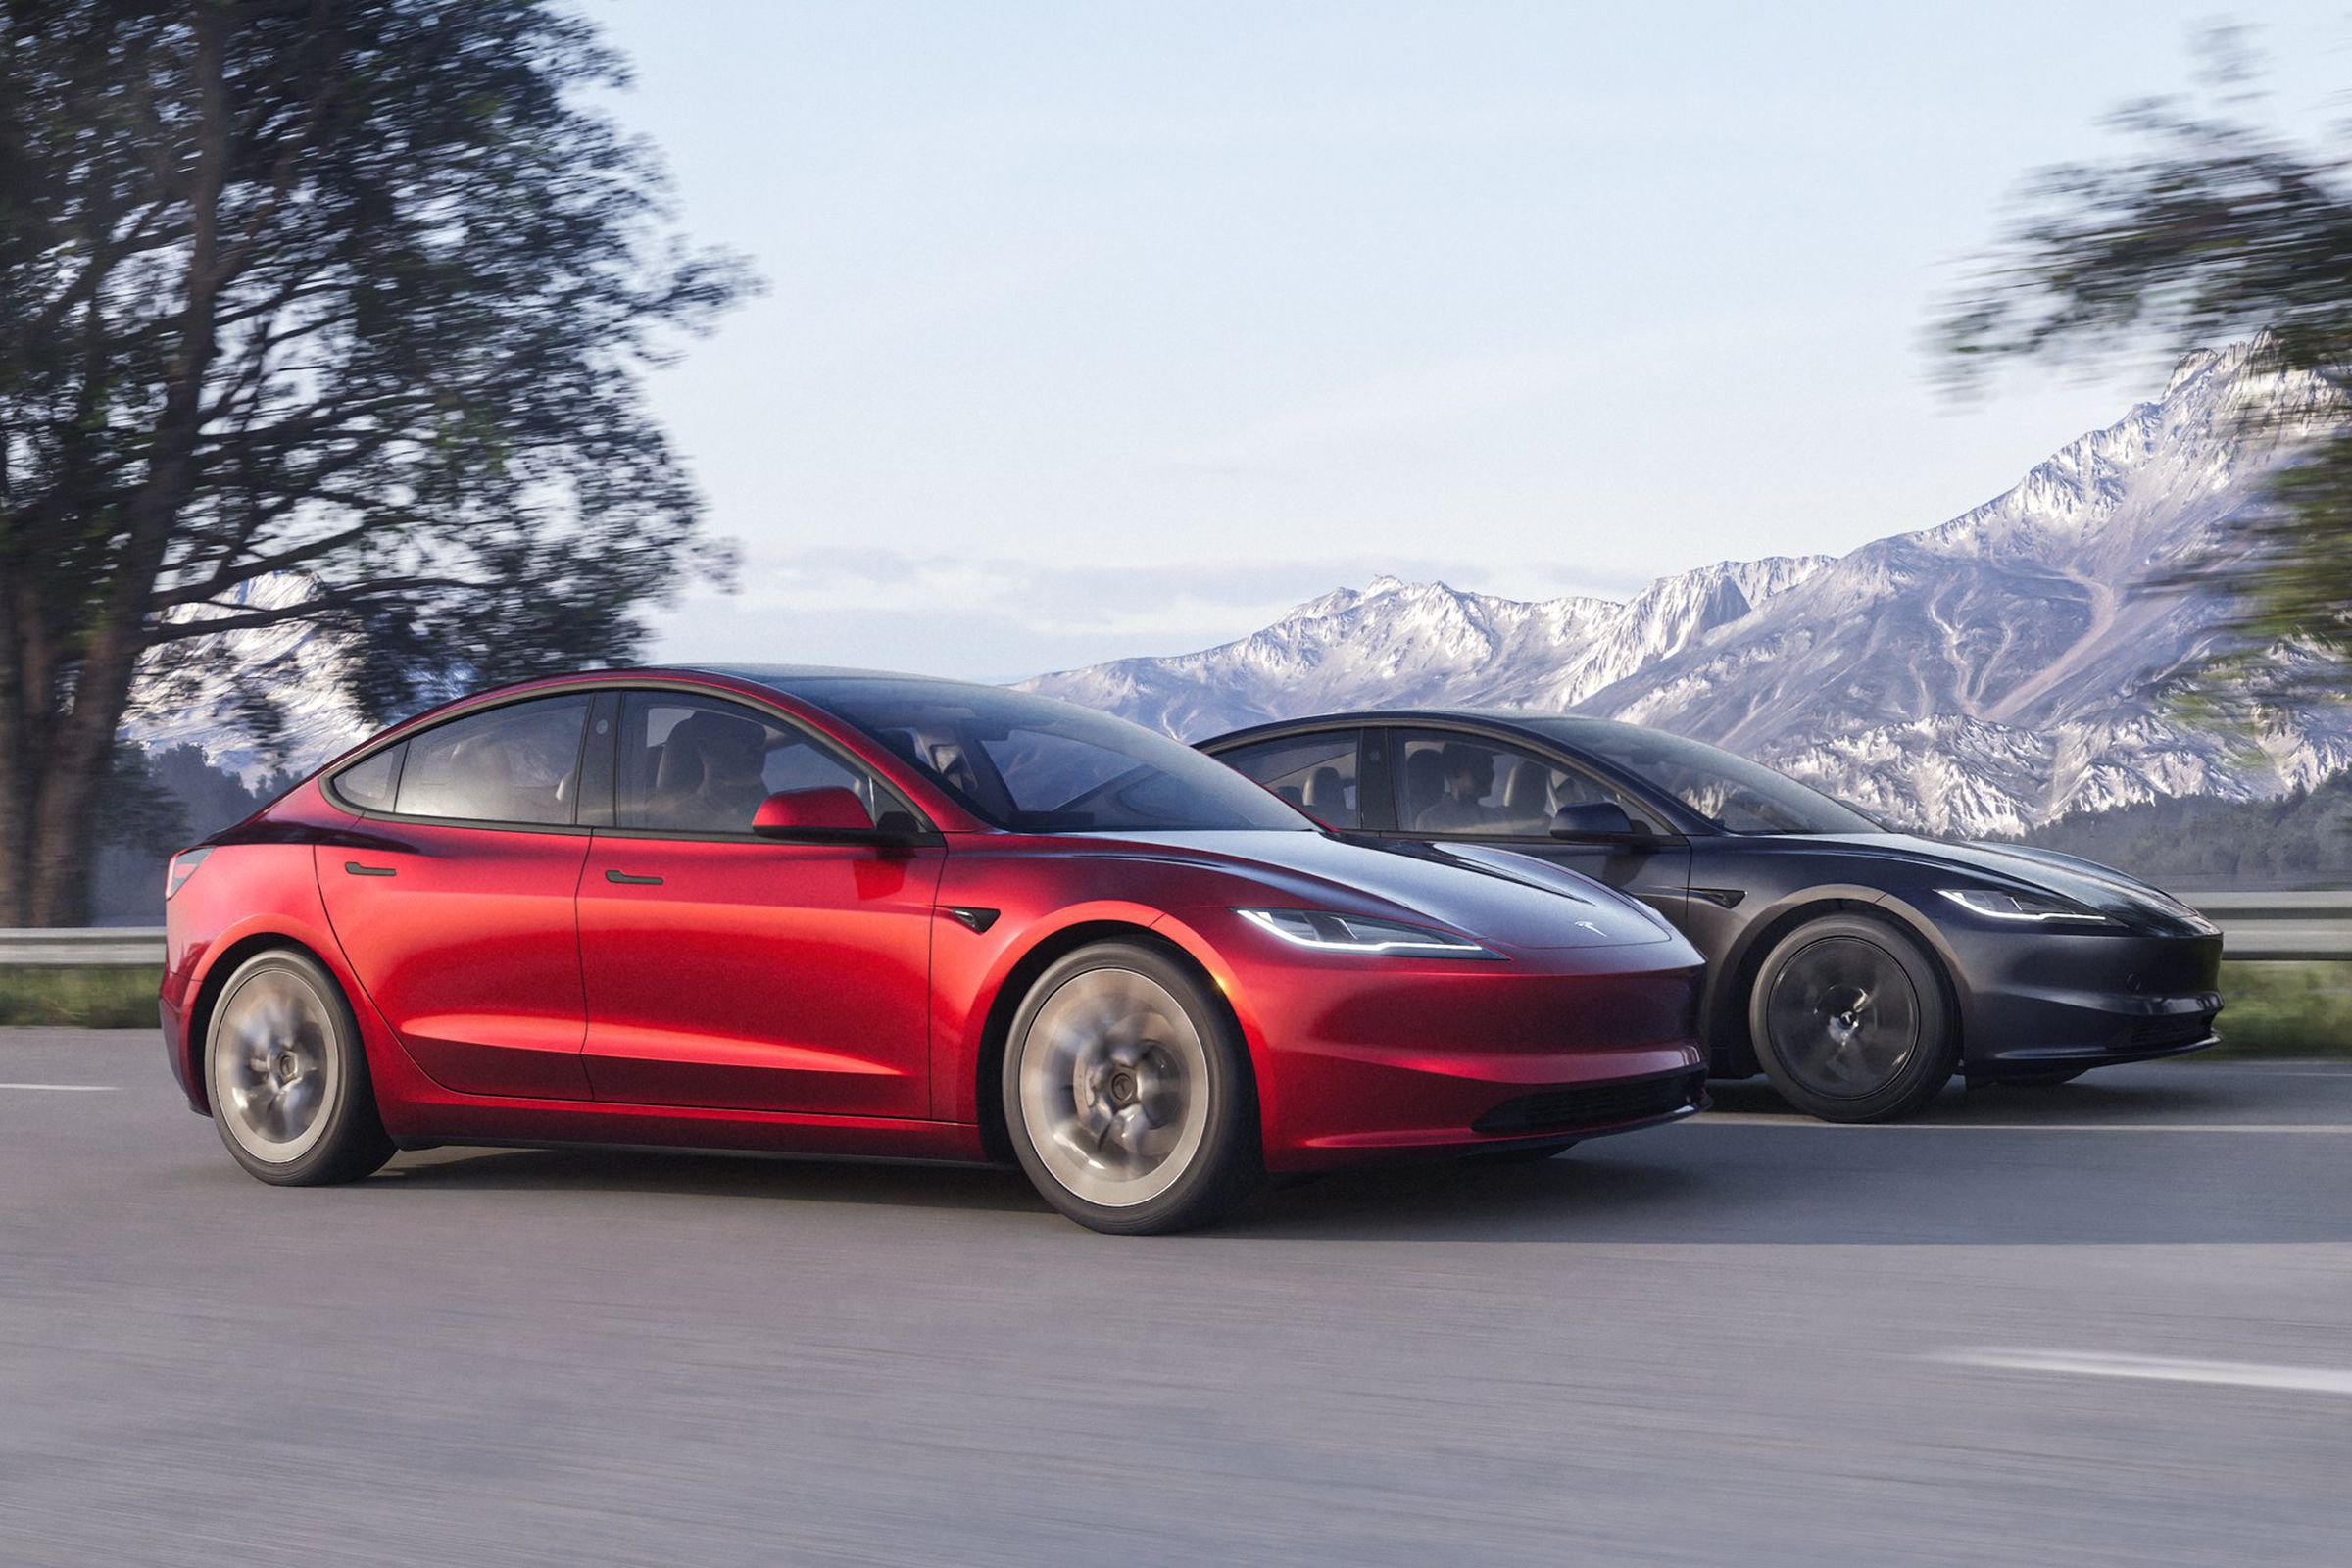 Two Tesla Model 3s shown driving on a mountain road, one red and one gray.